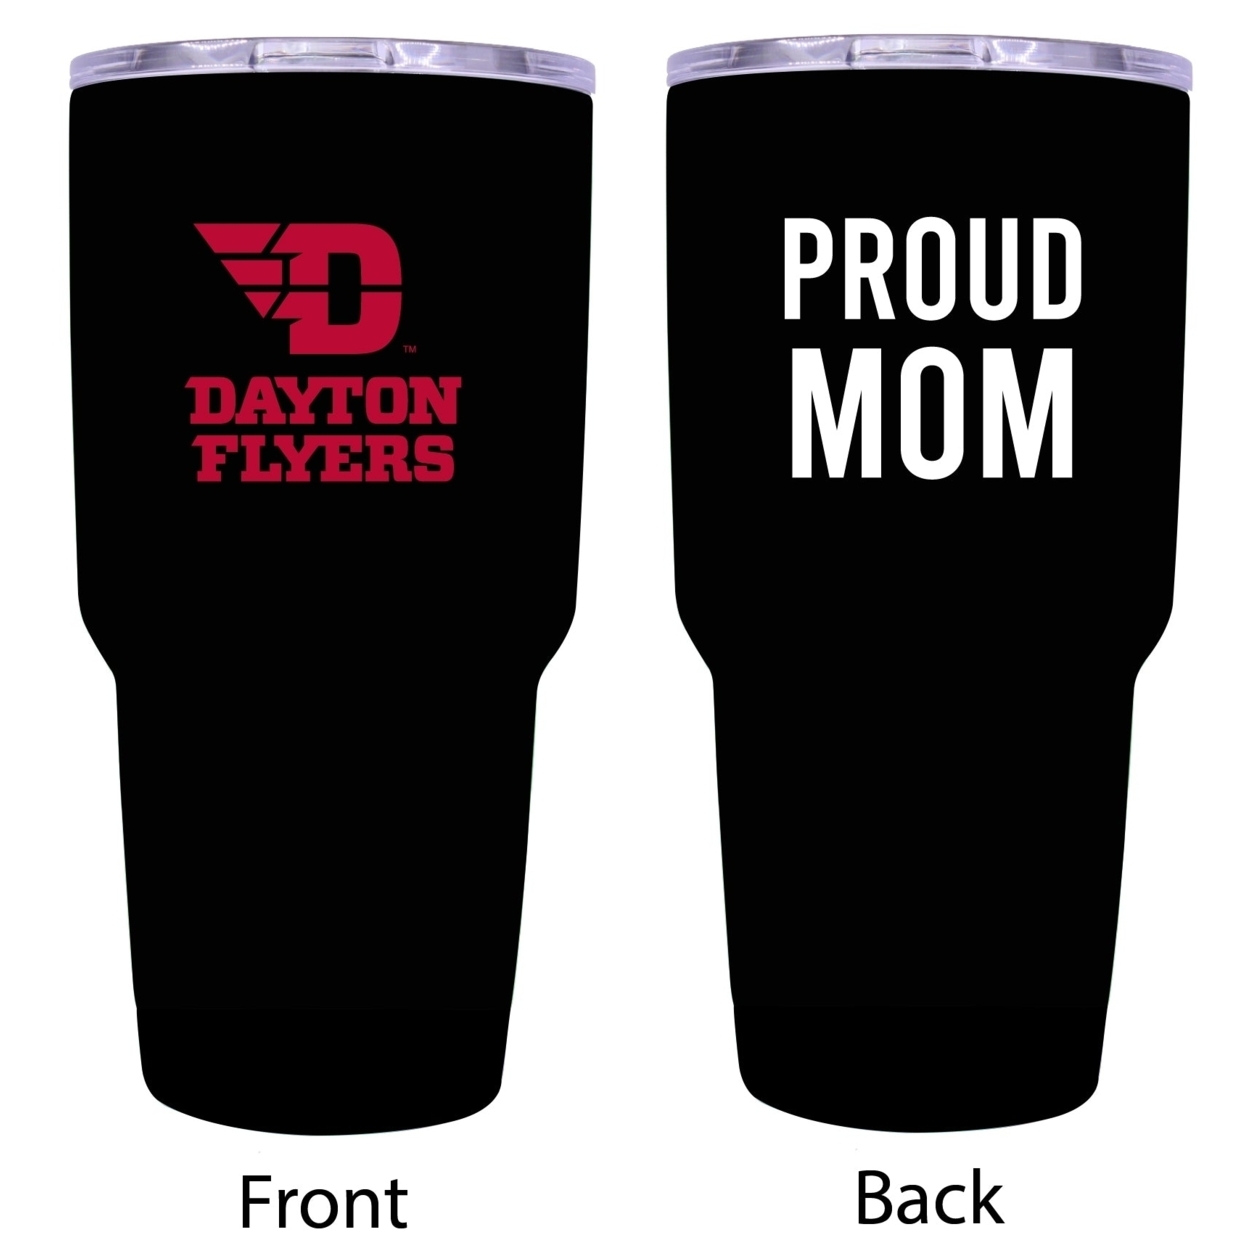 R And R Imports Dayton Flyers Proud Mom 24 Oz Insulated Stainless Steel Tumblers Black.